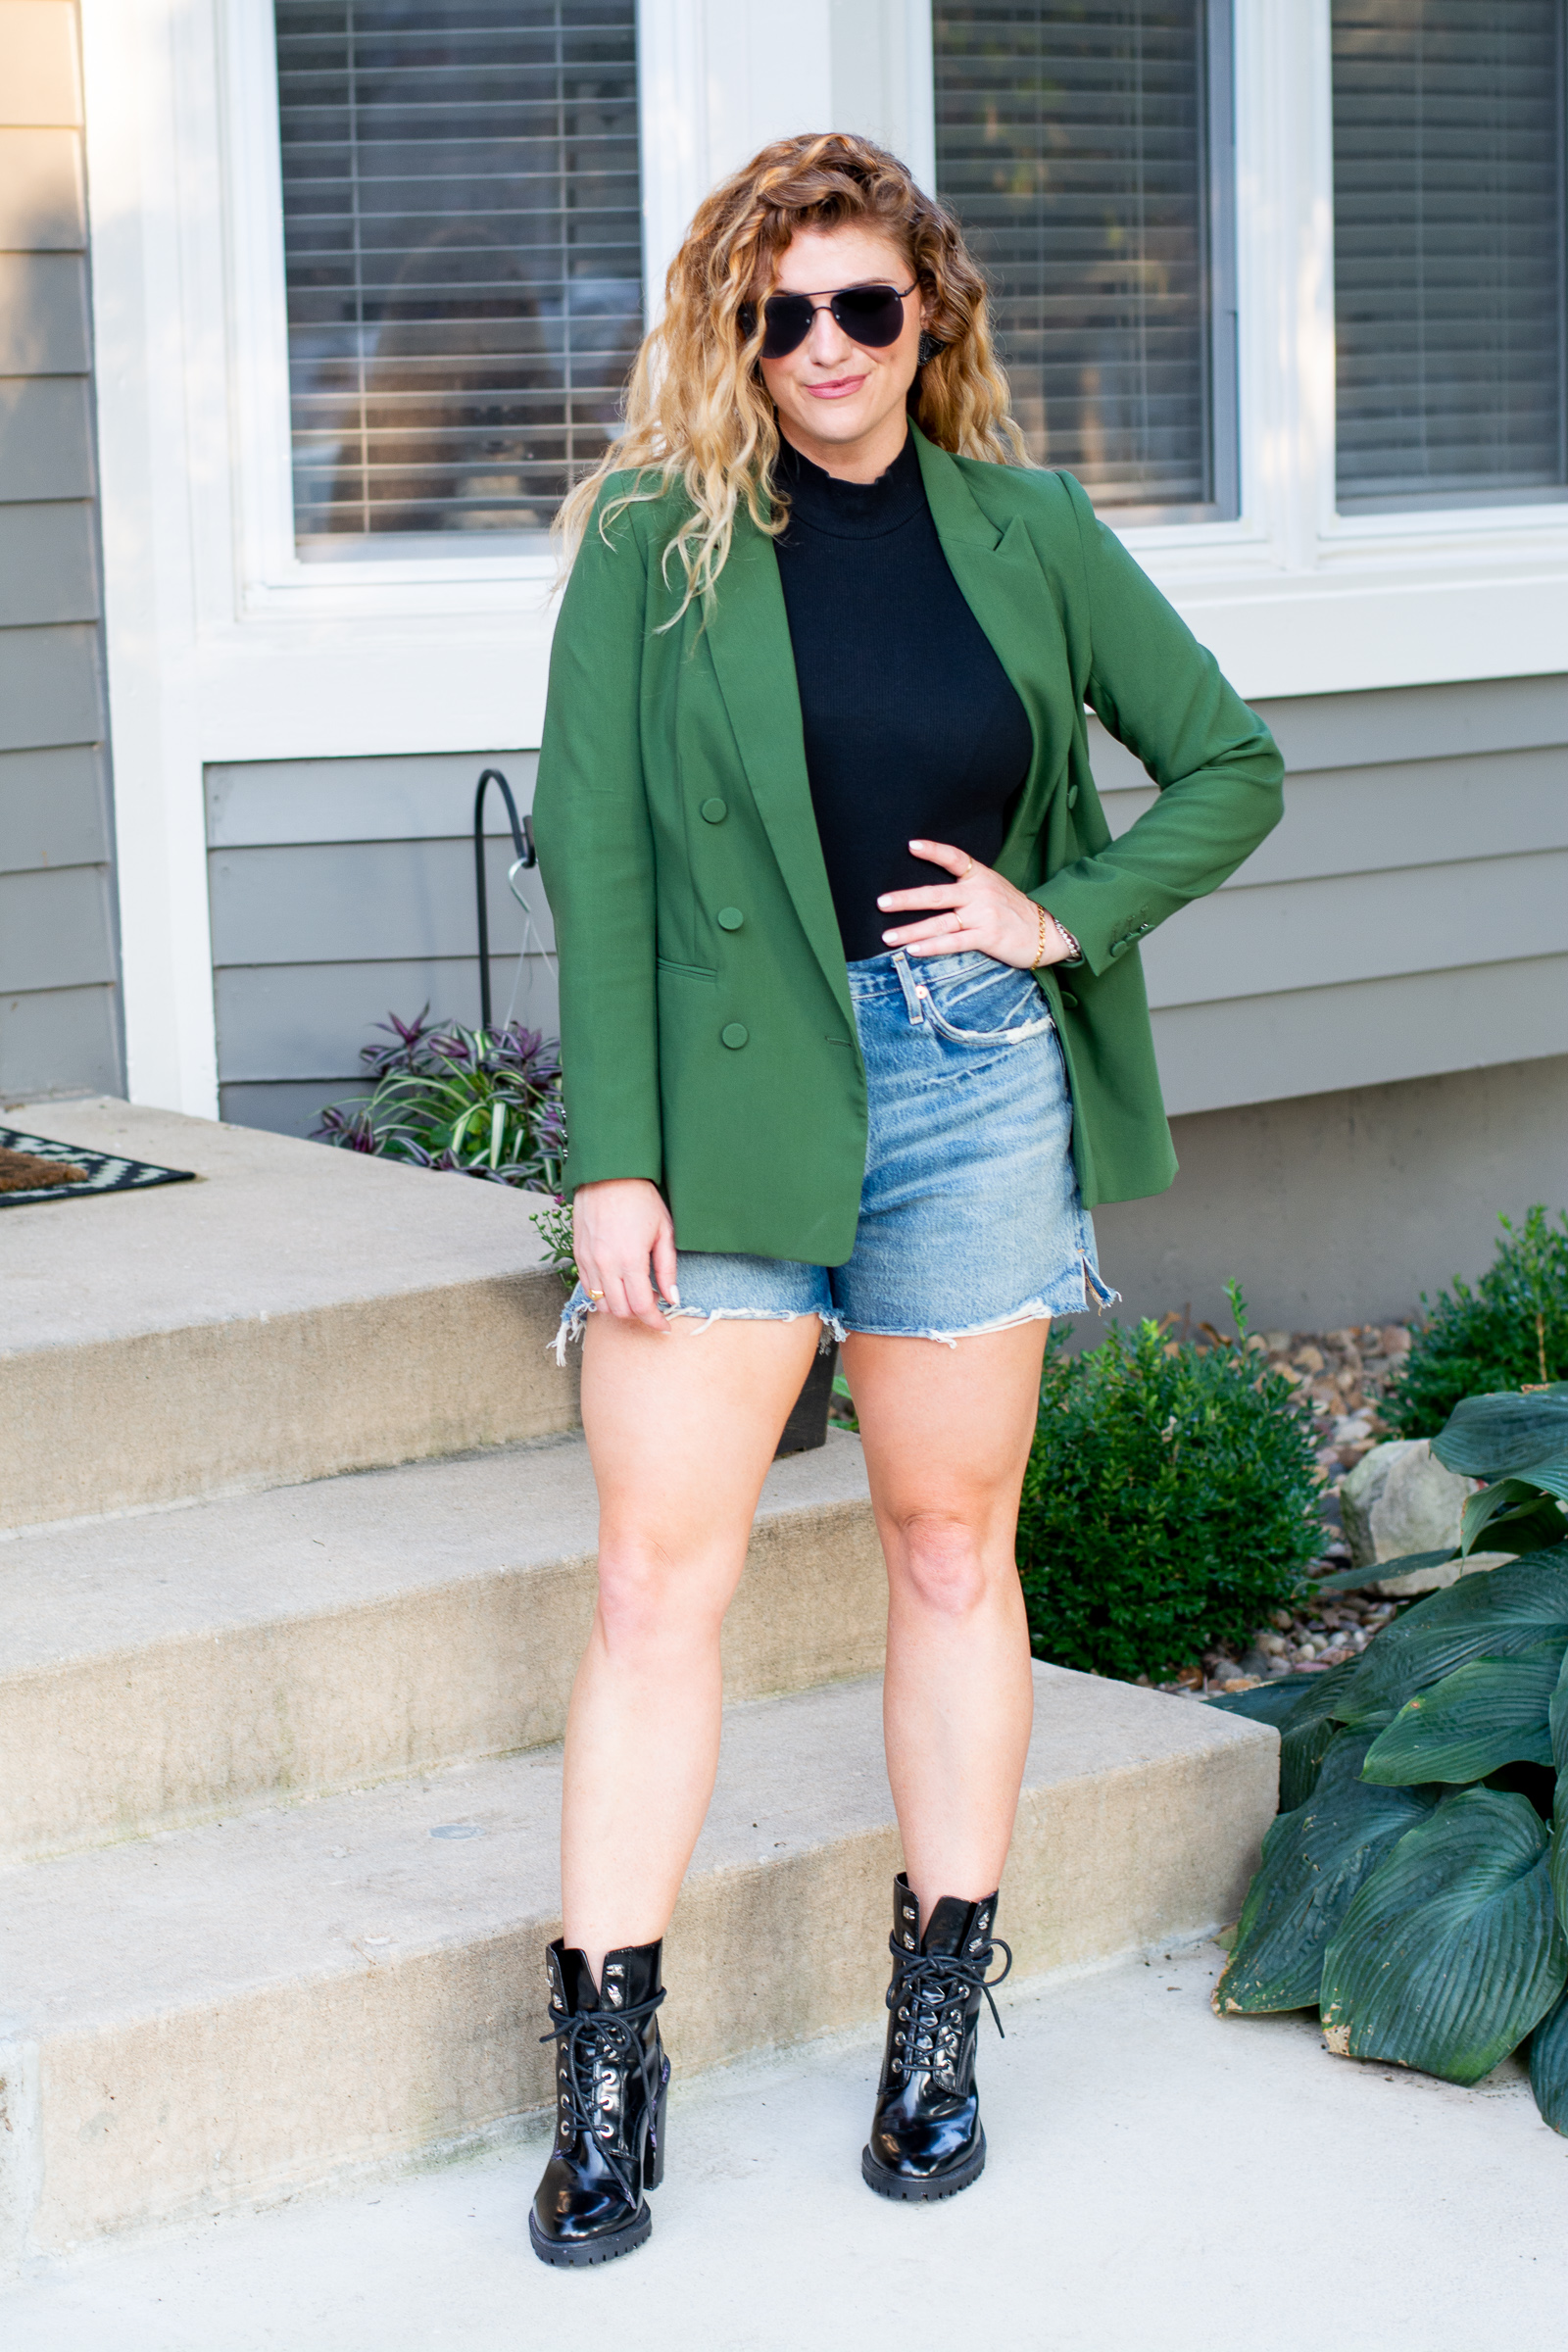 Green Blazer + Combat Boots for Early Fall. | LSR